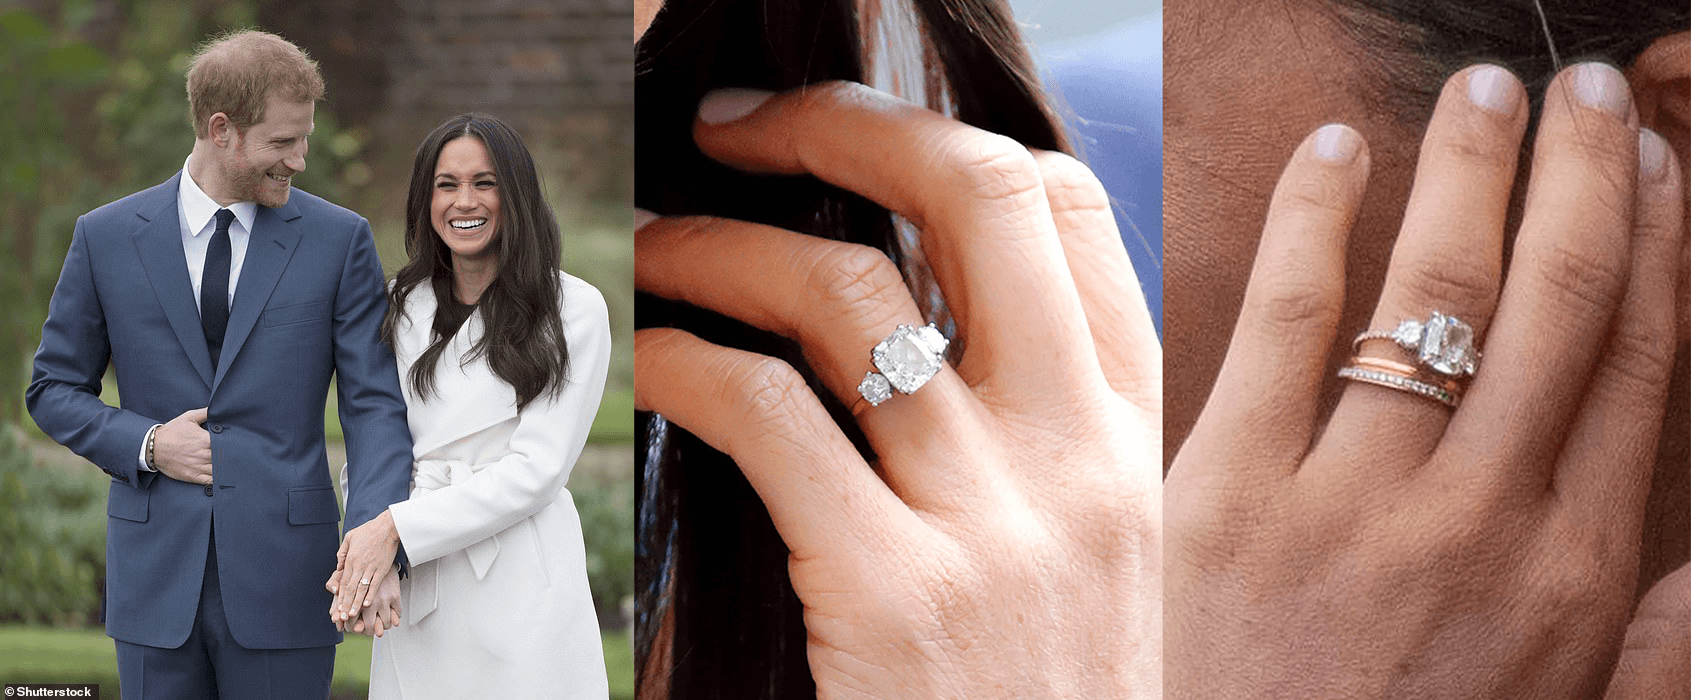 Meghan Markle Changed Her Engagement Ring